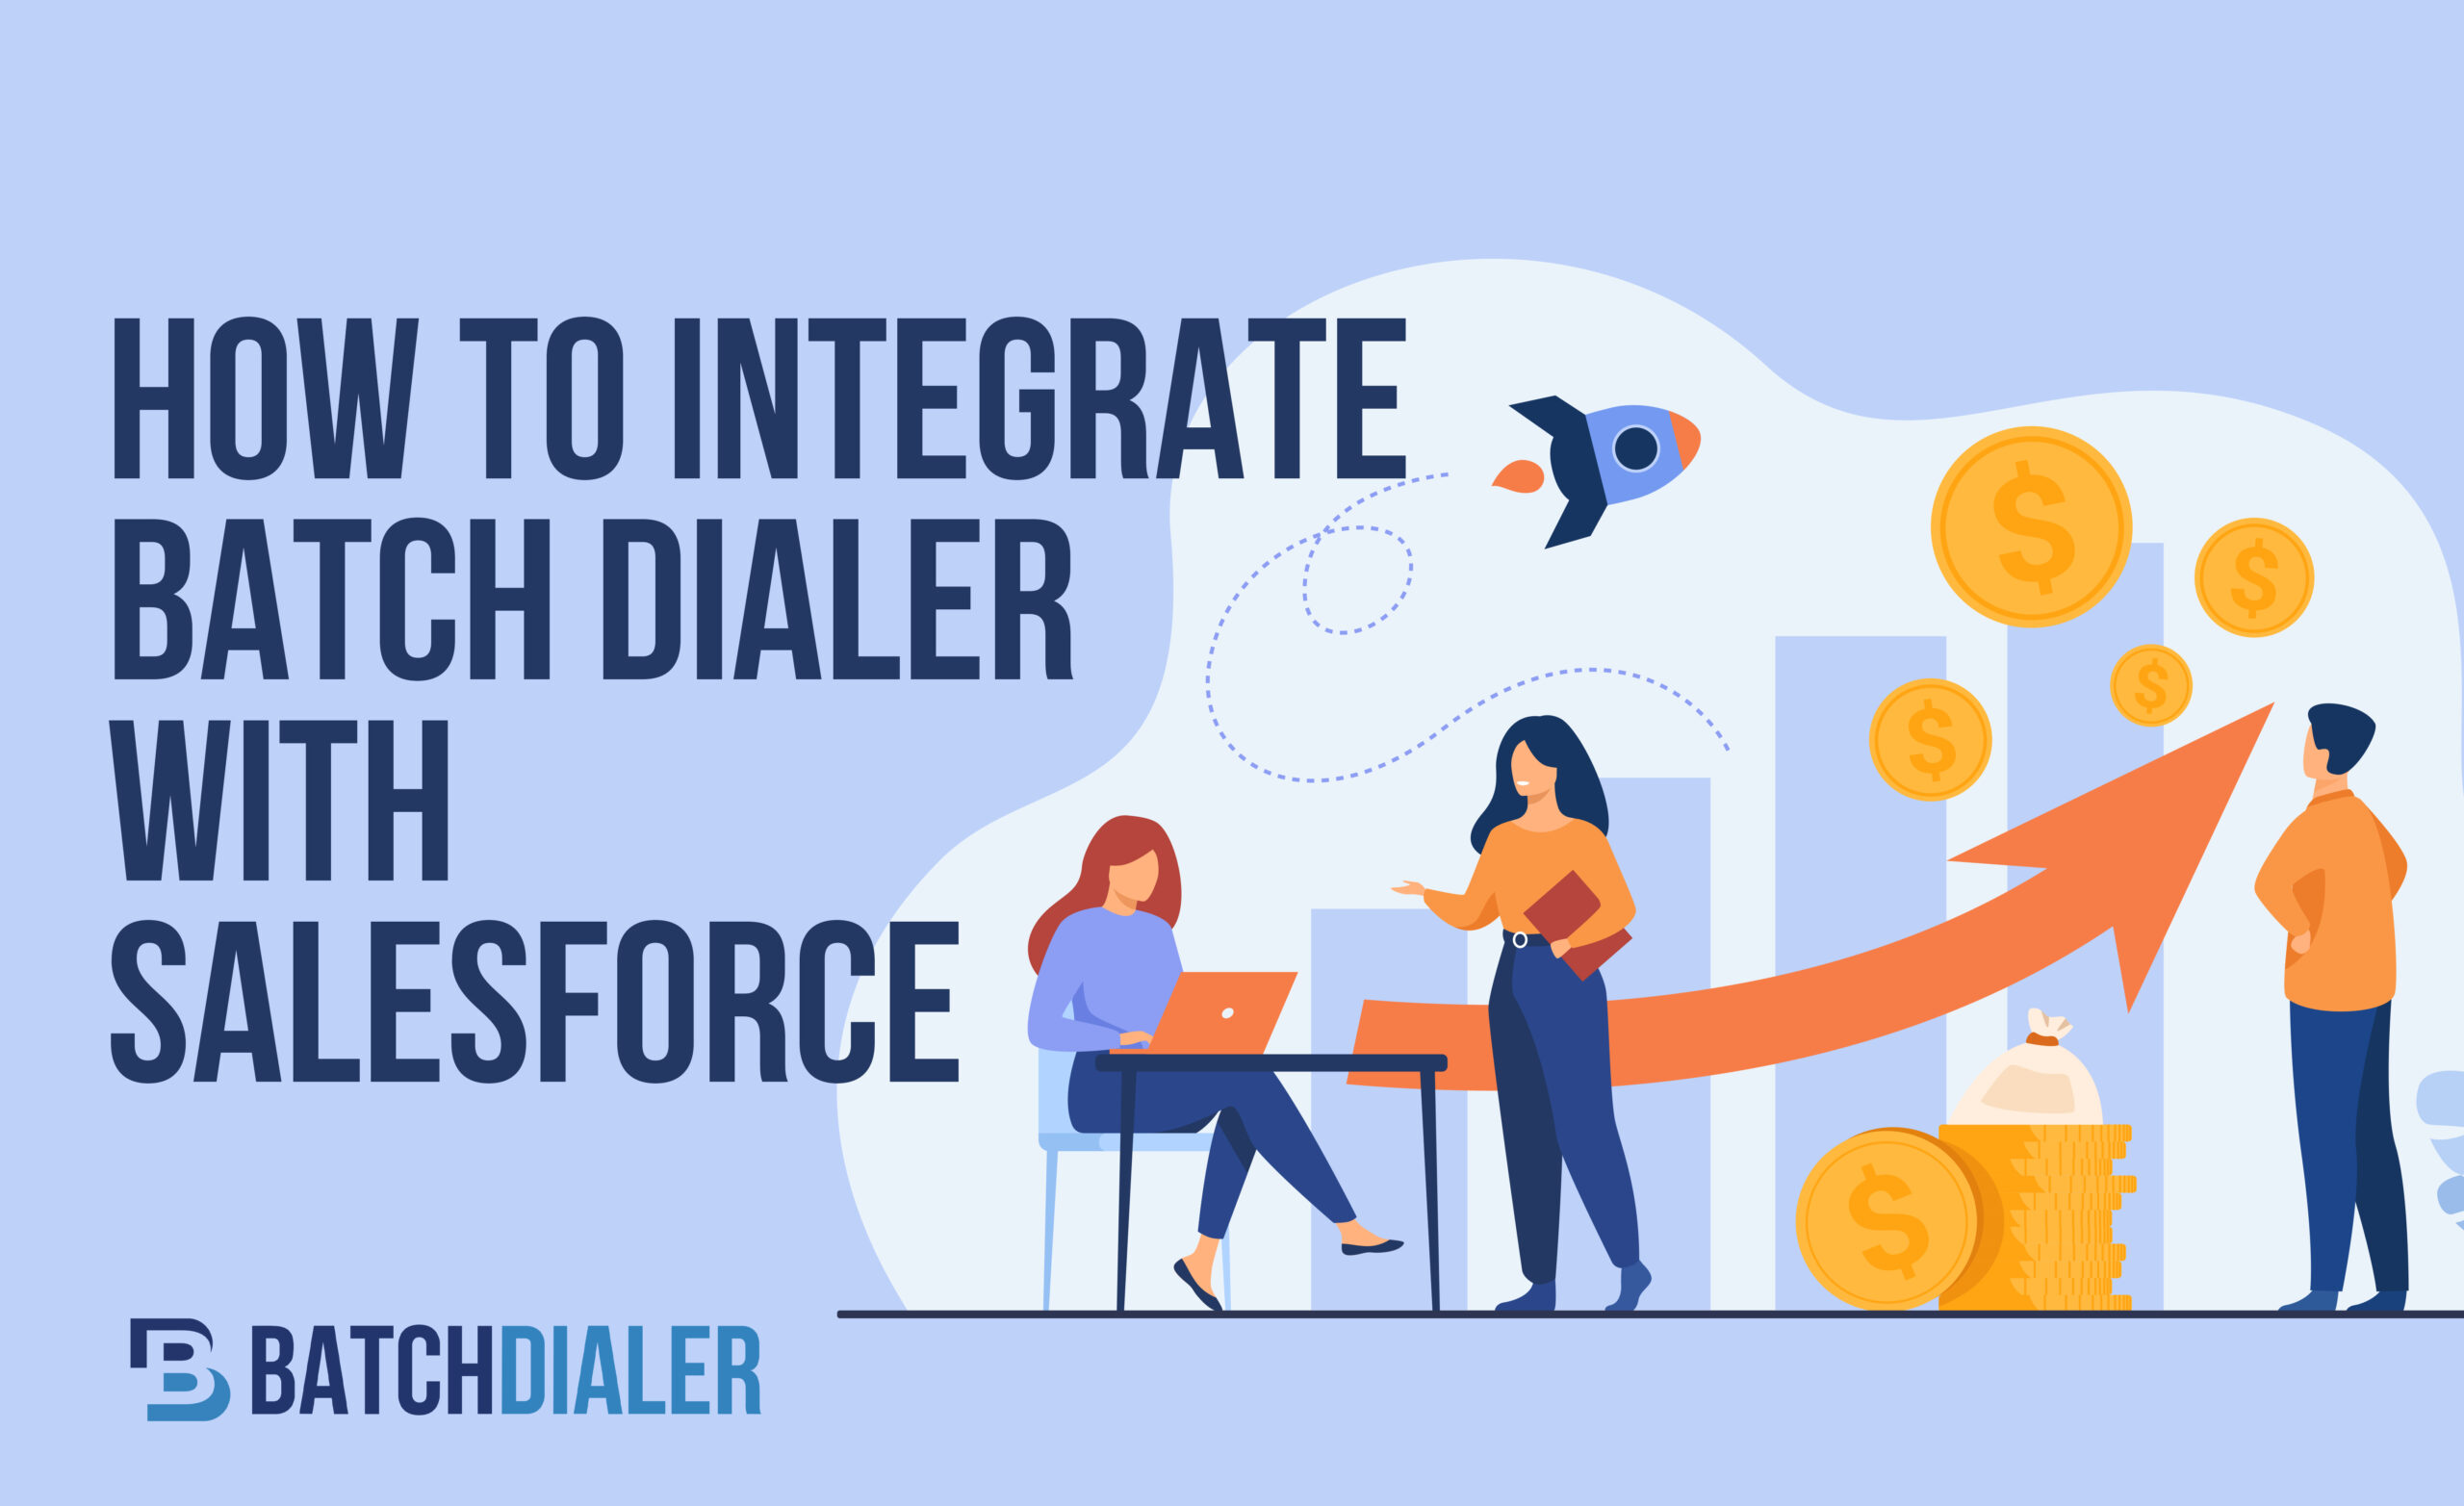 How To Integrate Batch Dialer With Salesforce